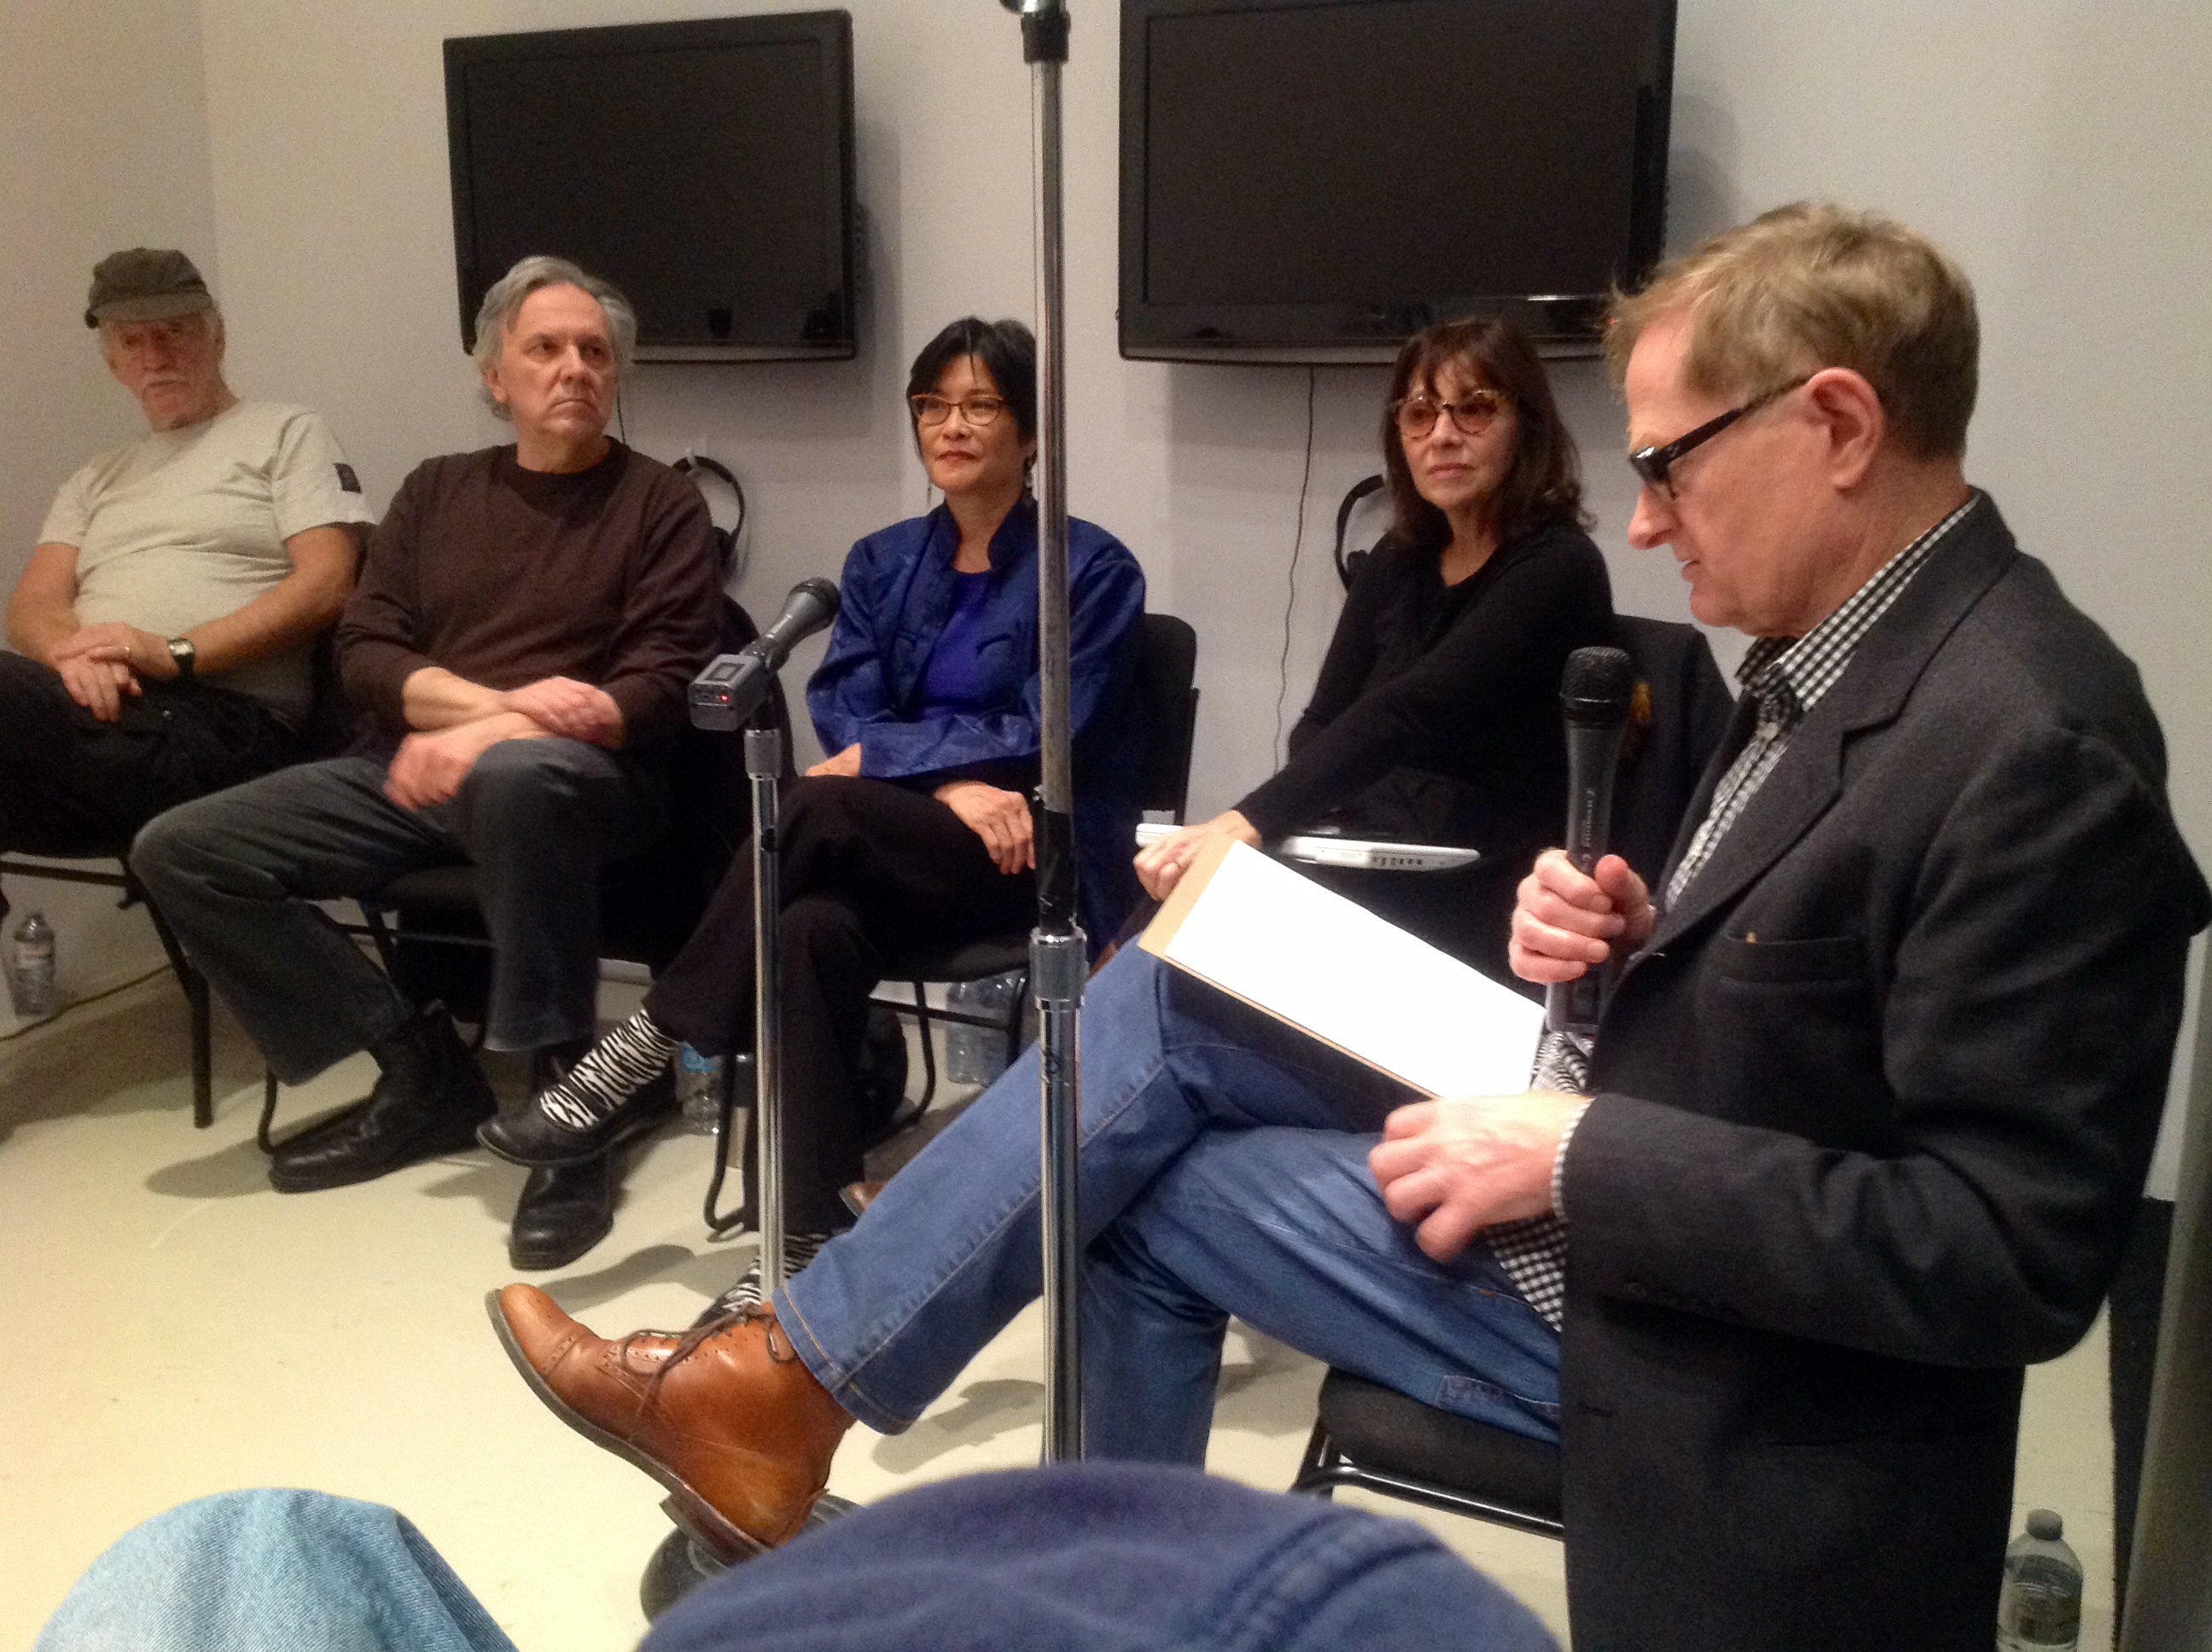 Ron-Giii-Peter-Dudar-Lily-Eng-Diane-Boadway-Philip-Monk-CEAC-Panel-1-AGYU-Oct-2014